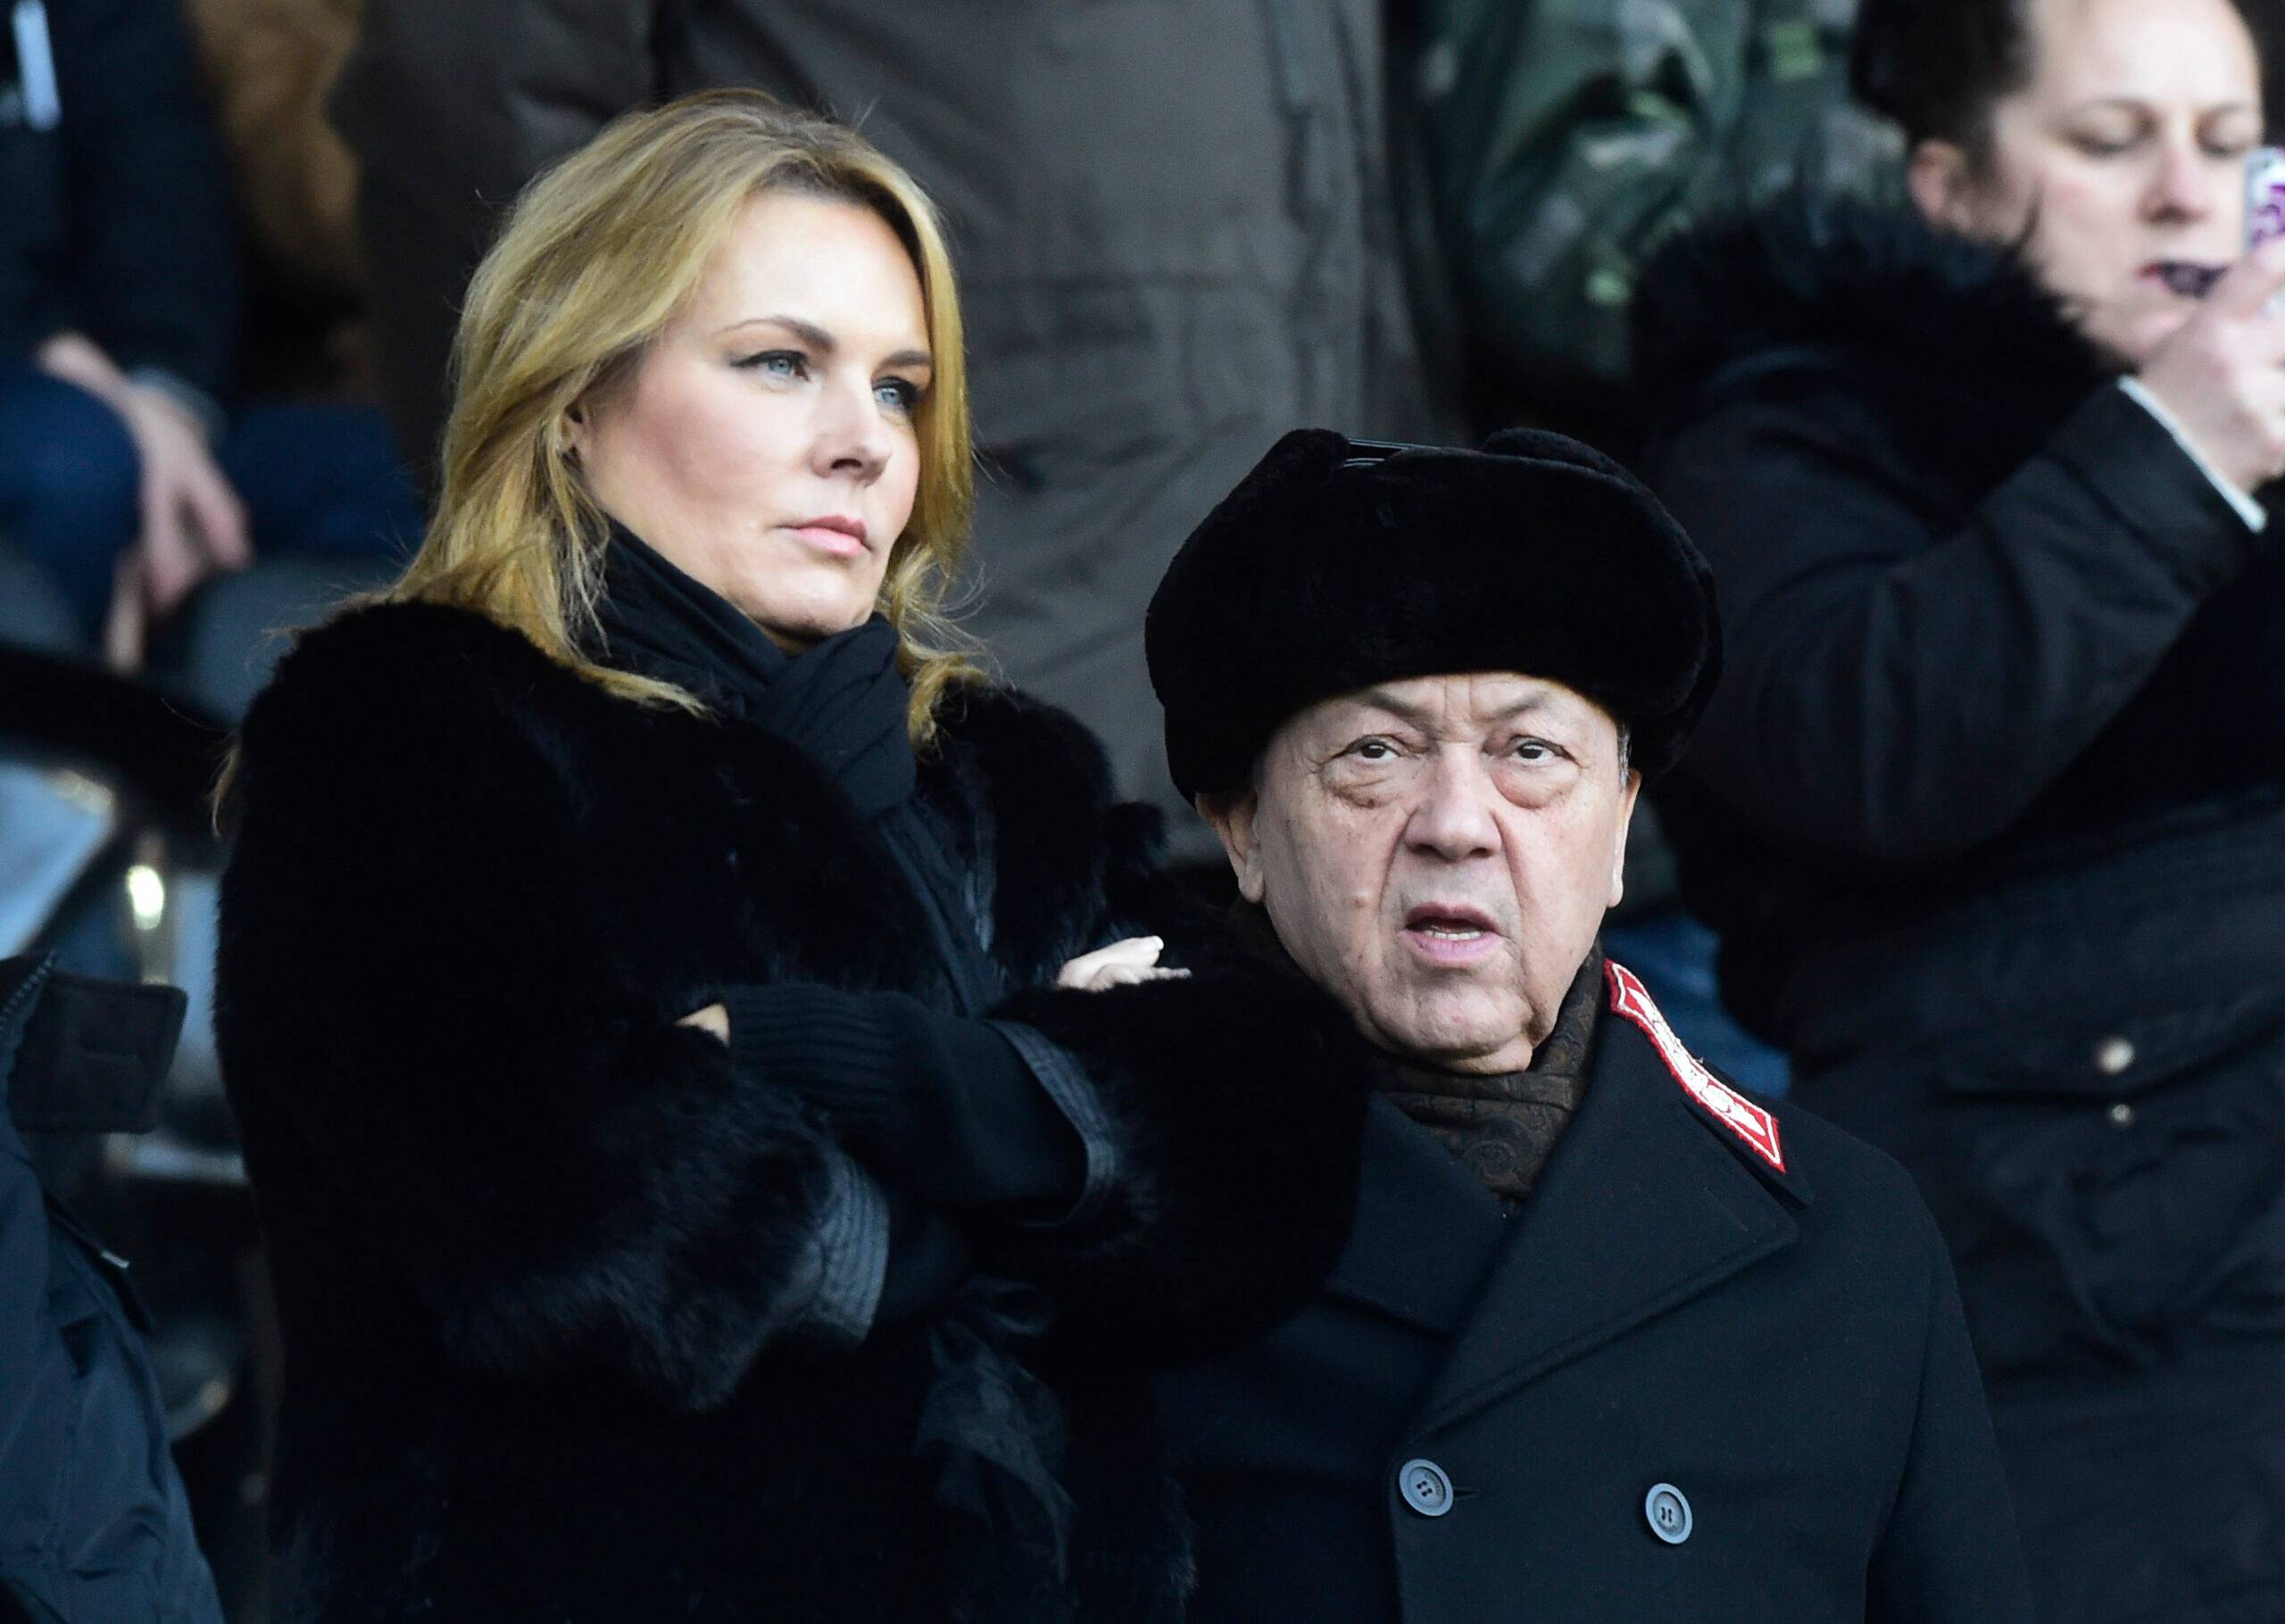 West Ham co-owner David Sullivan in the stands before a game against Swansea City